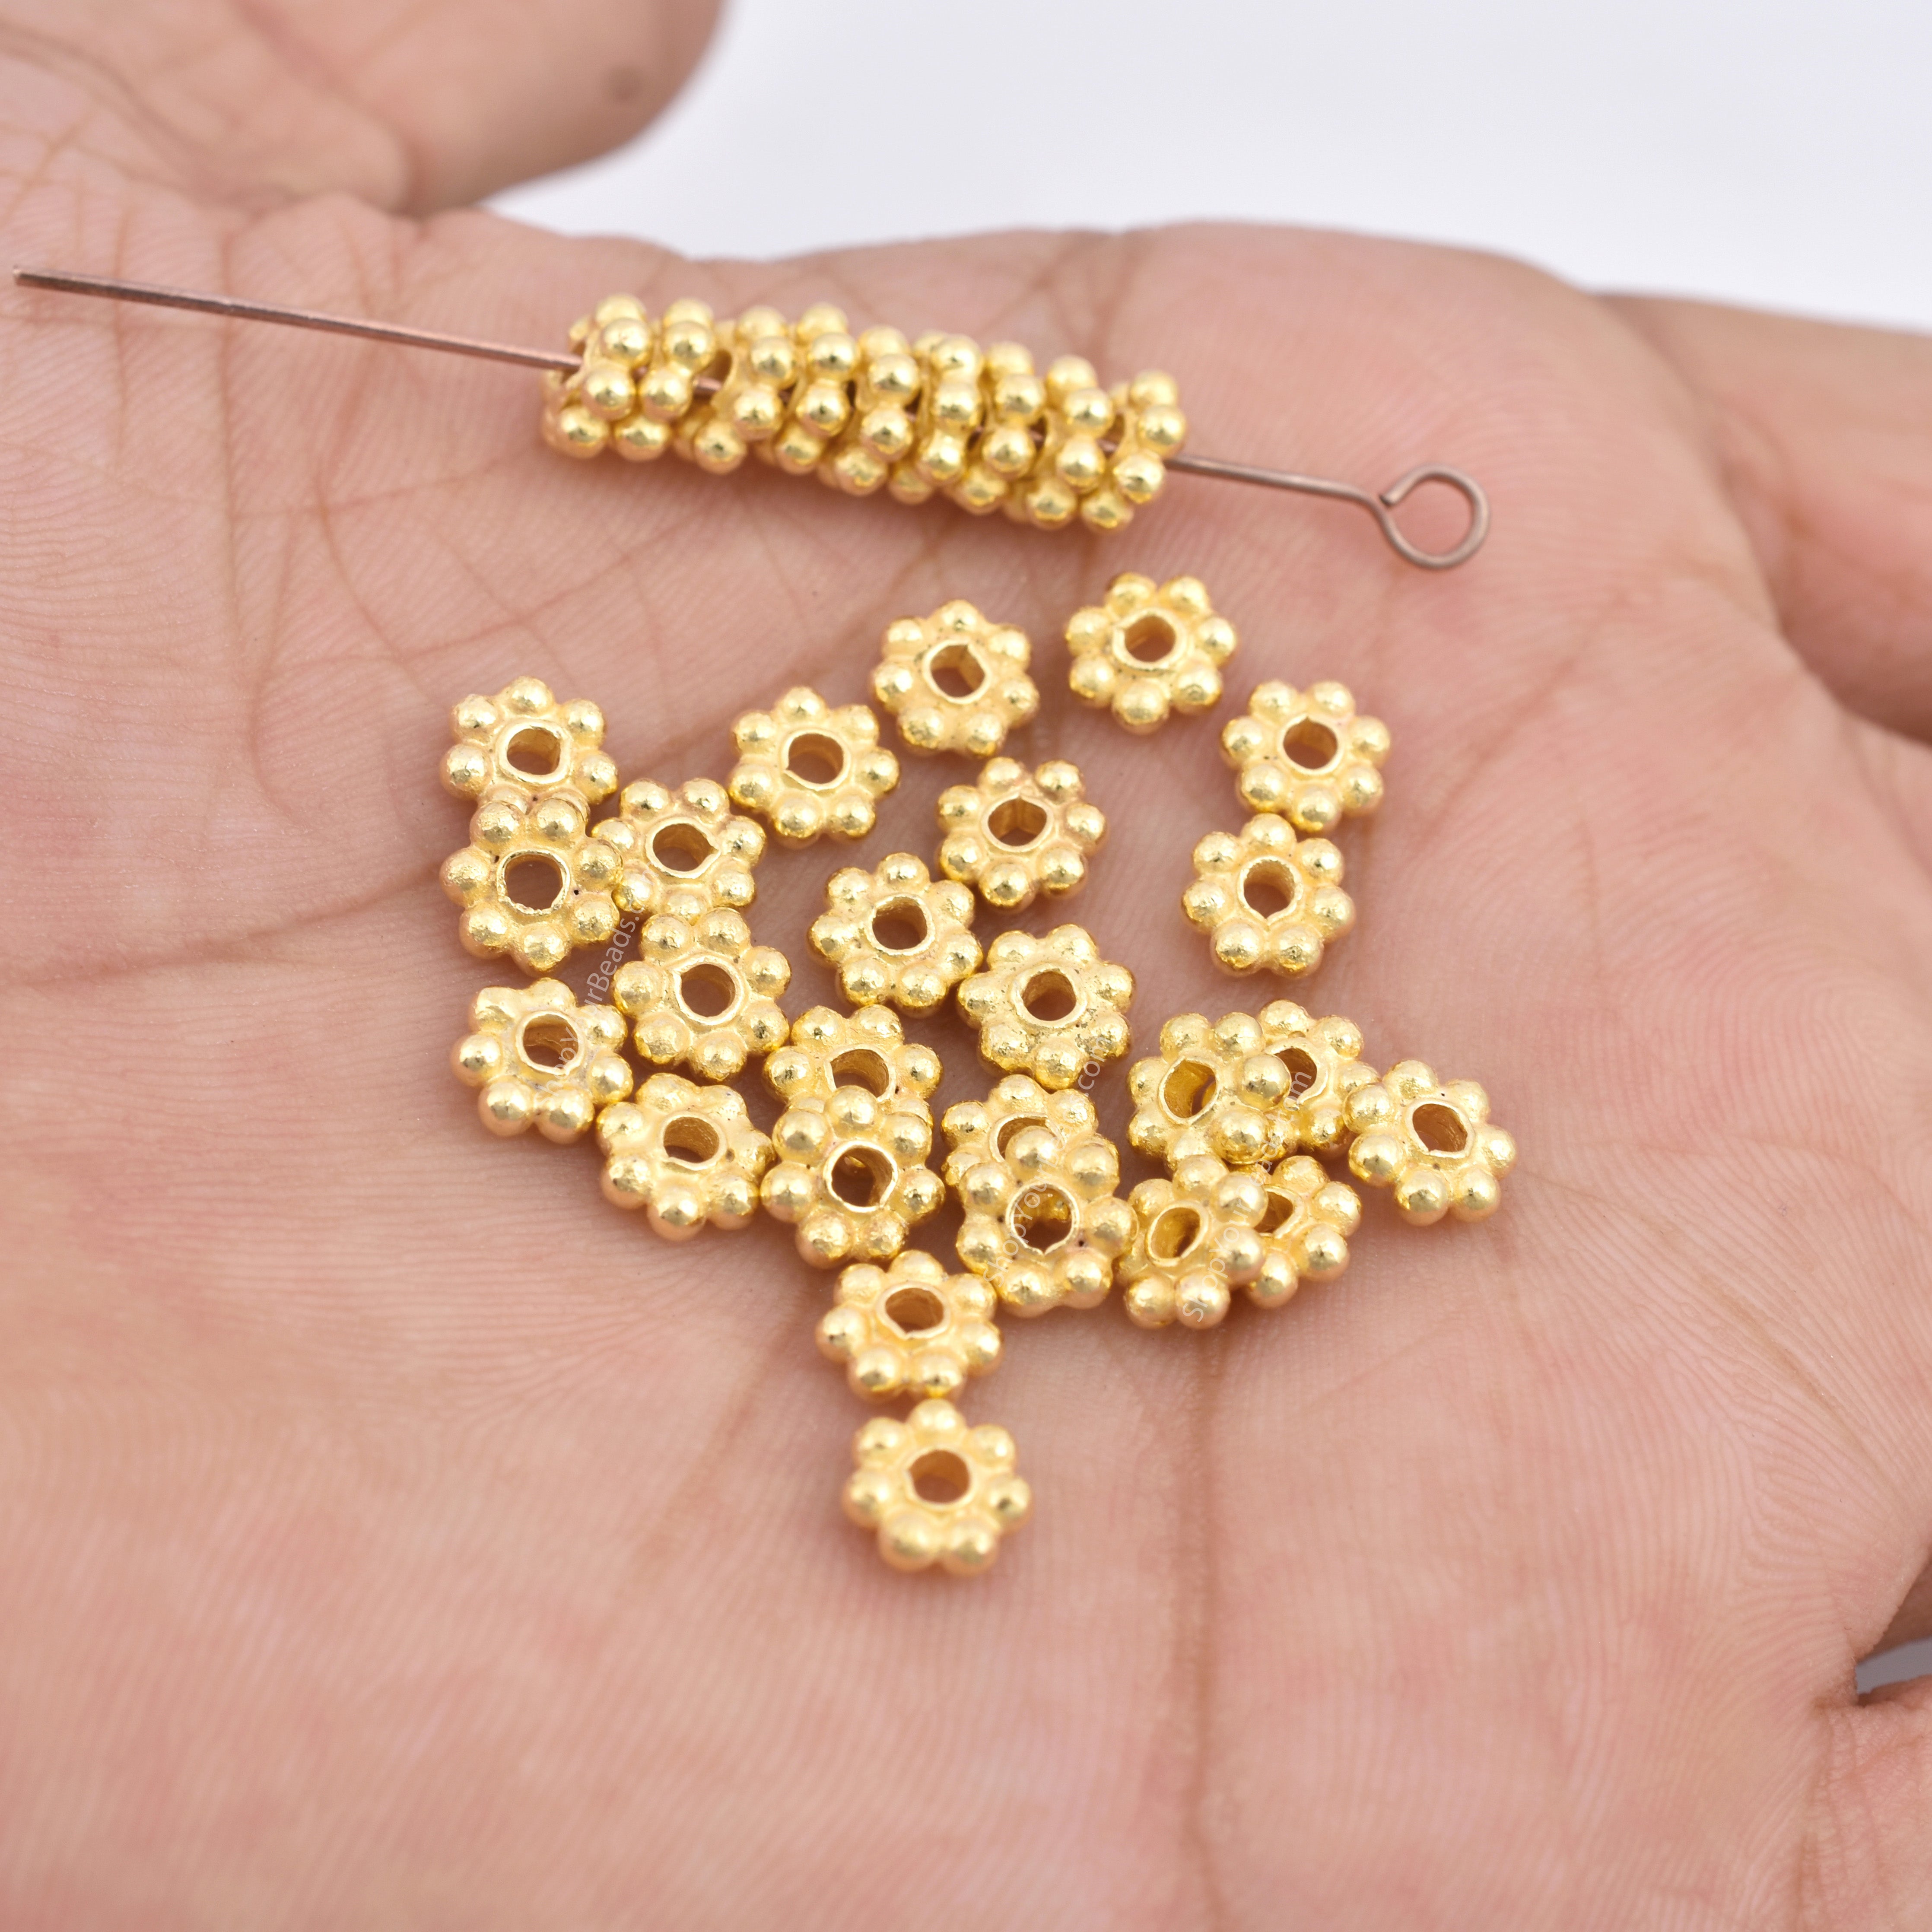 9mm 10pcs Bali Gold Beads for Jewelry Making, Gold Plated Spacer Beads,  Coil Shape, Jewelry Findings 